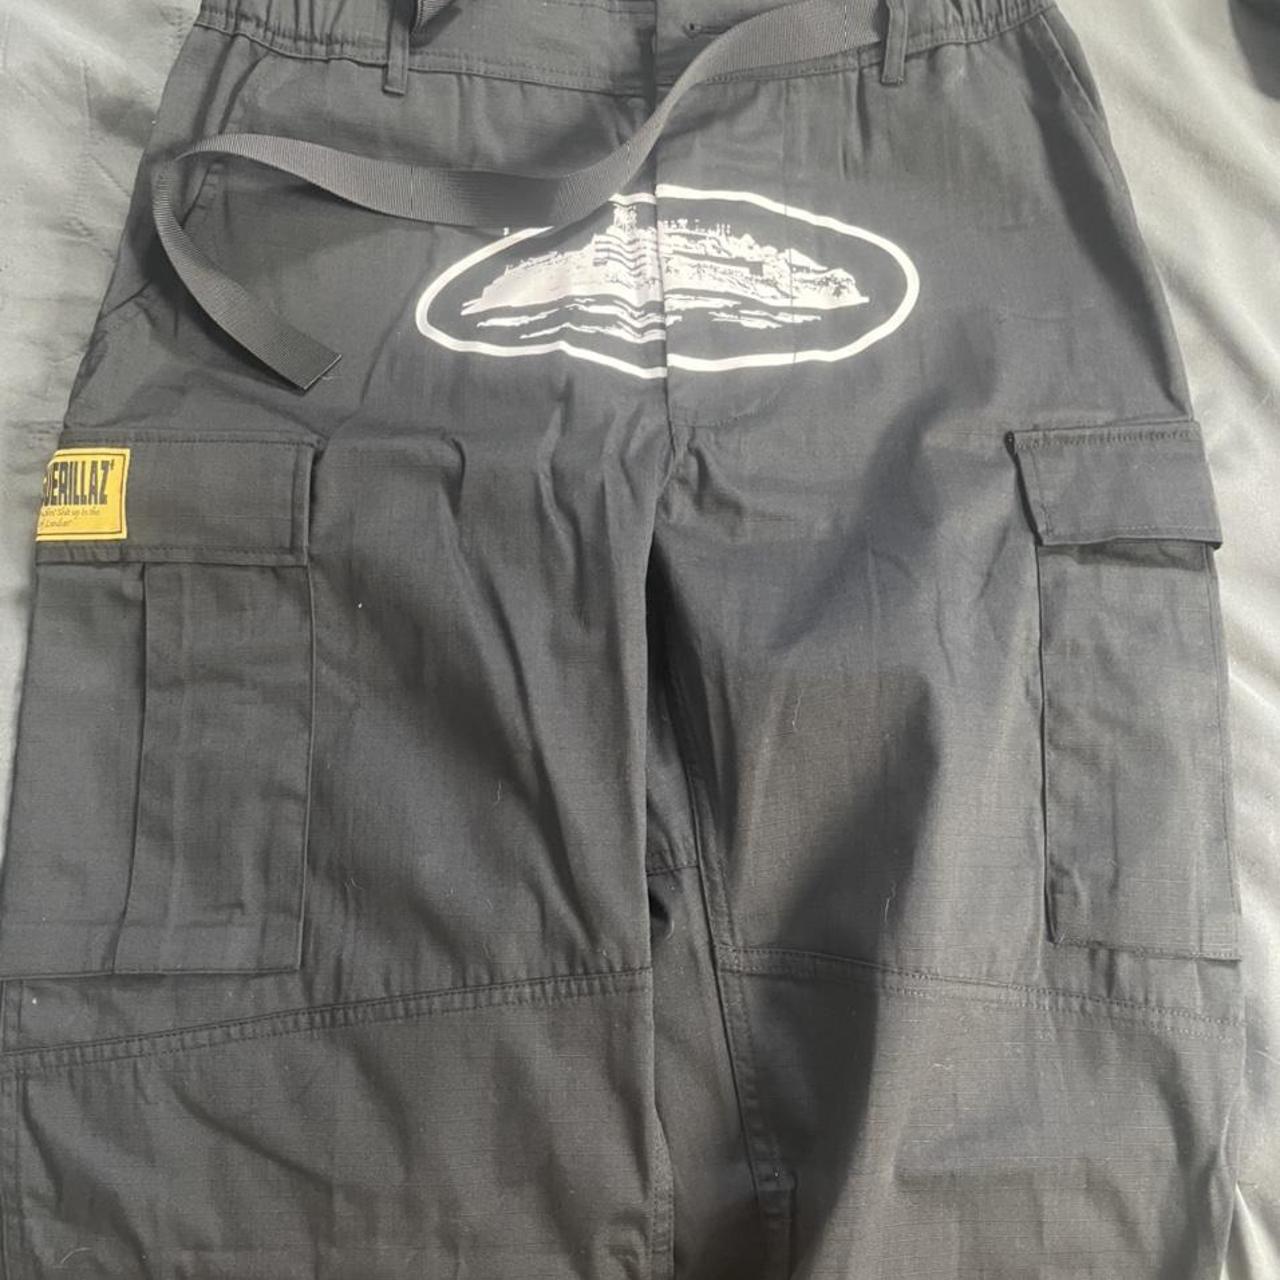 Corteiz cargos, never worn (size large), Comes with